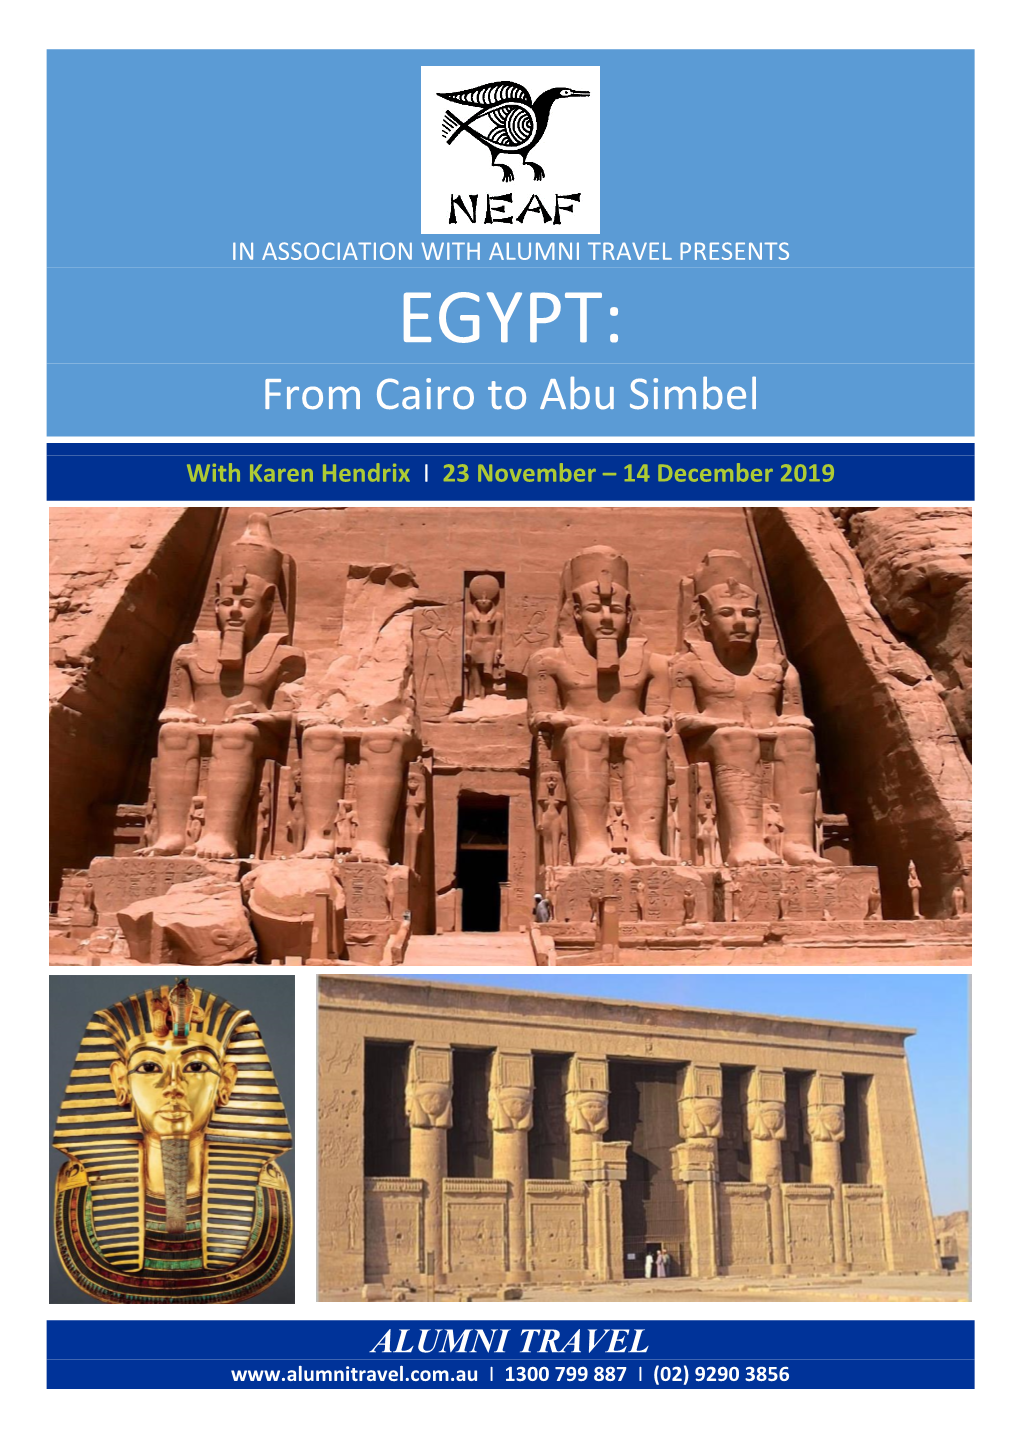 EGYPT: from Cairo to Abu Simbel